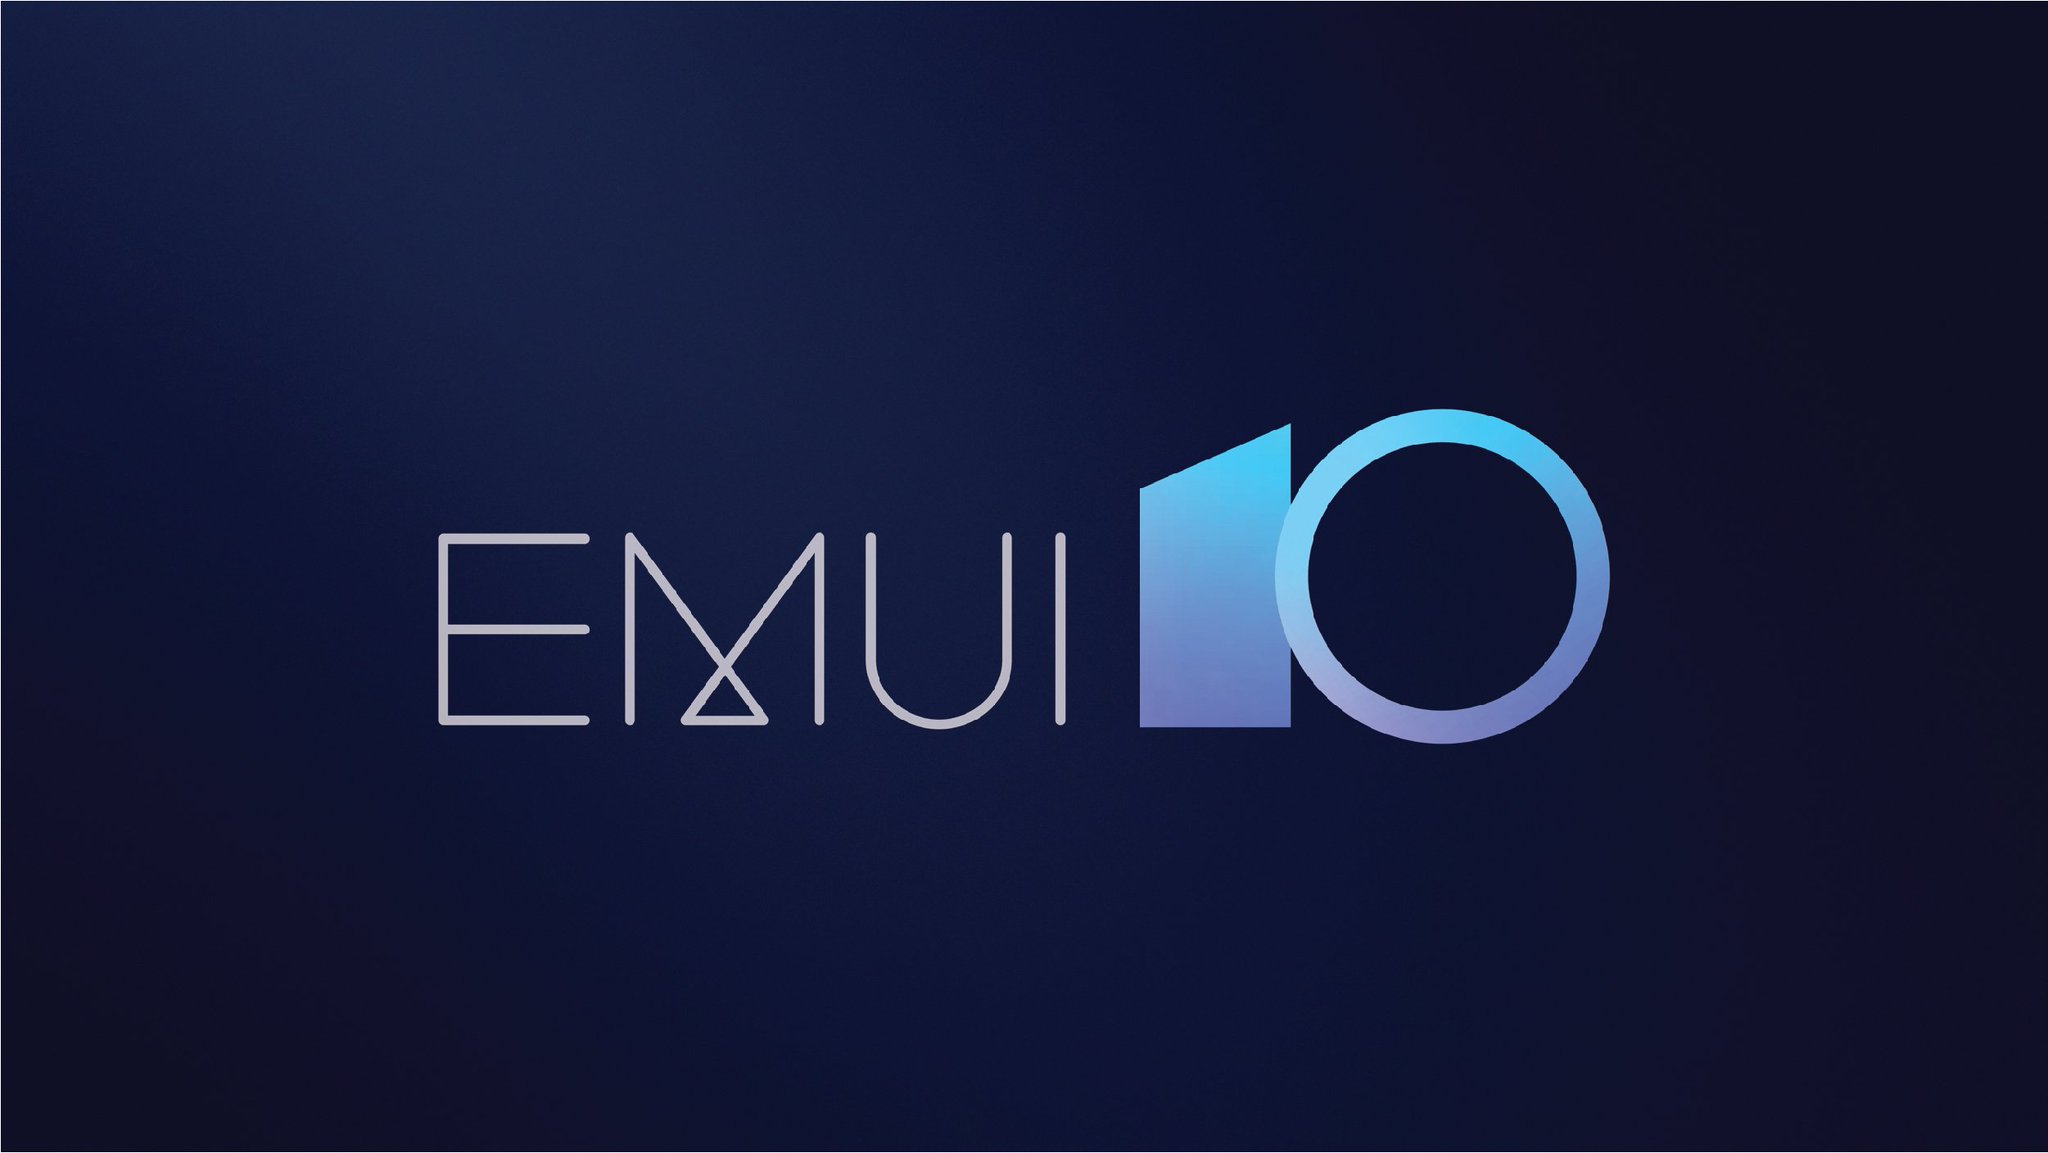 EMUI 10 Beta is now available for Huawei Mate 10, P20, Honor 8X and more -  Gizmochina